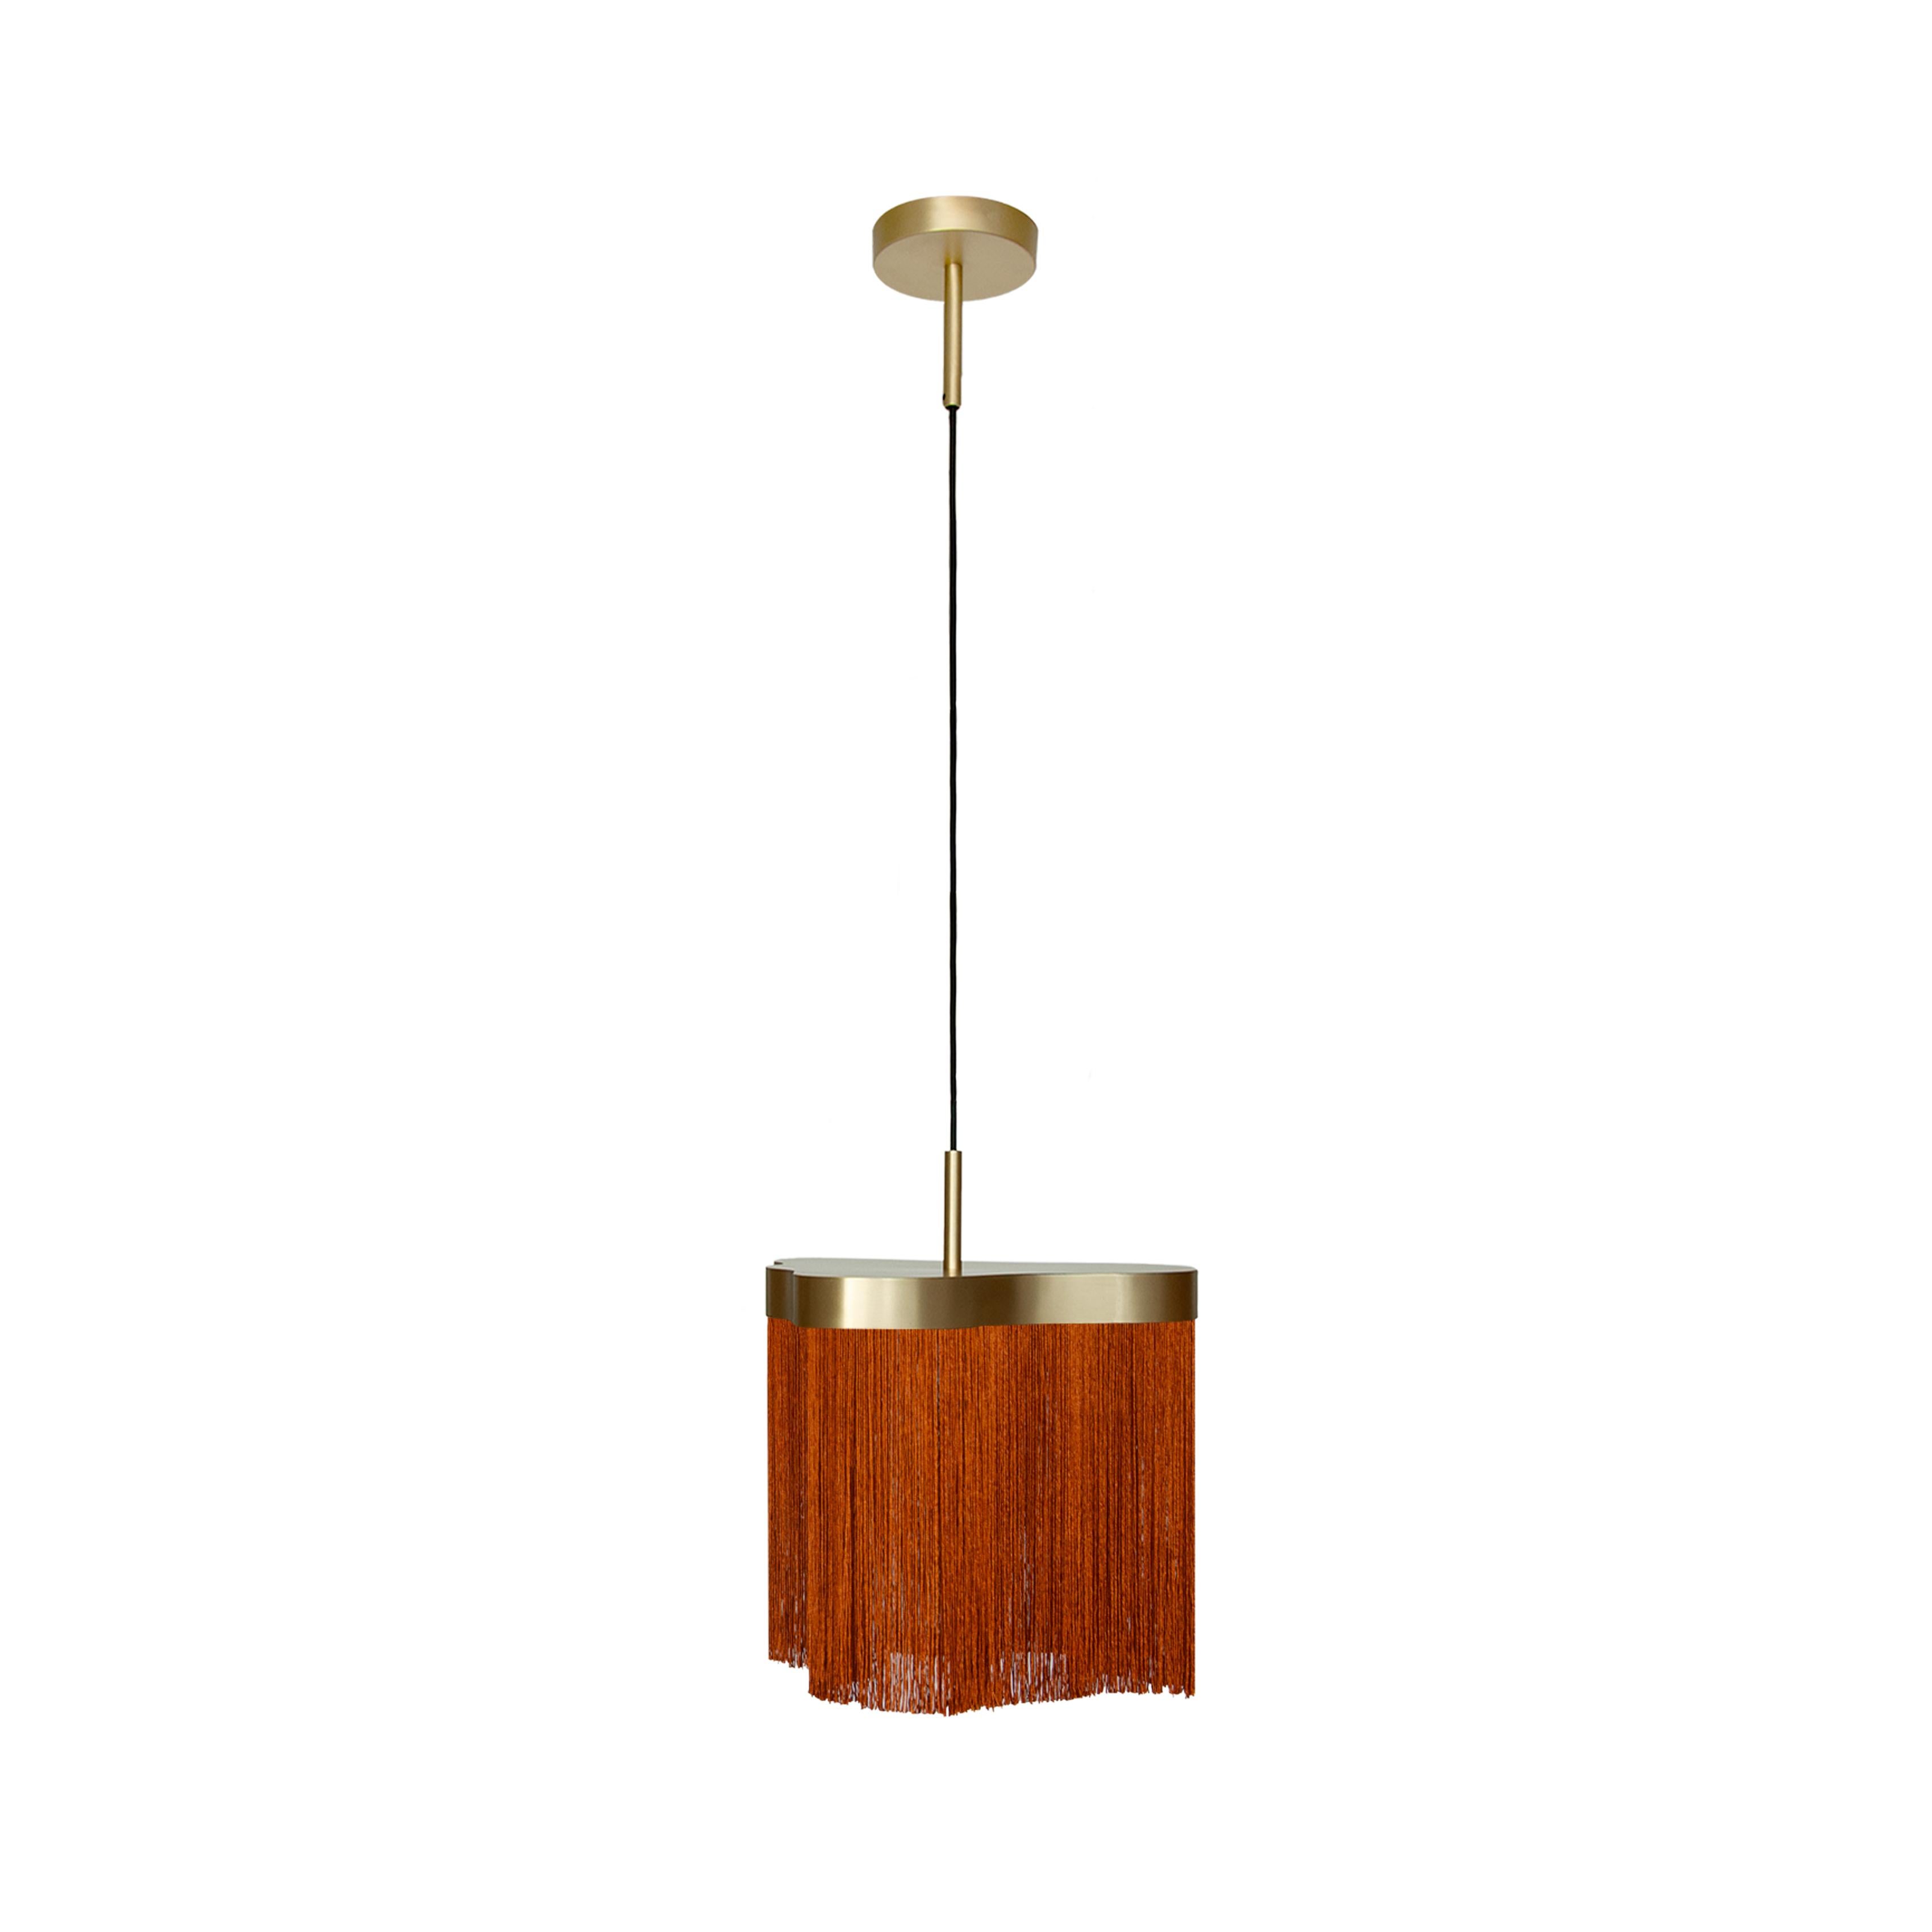 Arcipelago Minorca Dimmable Suspension Lamp in Satin Brass with Fireproof Rust